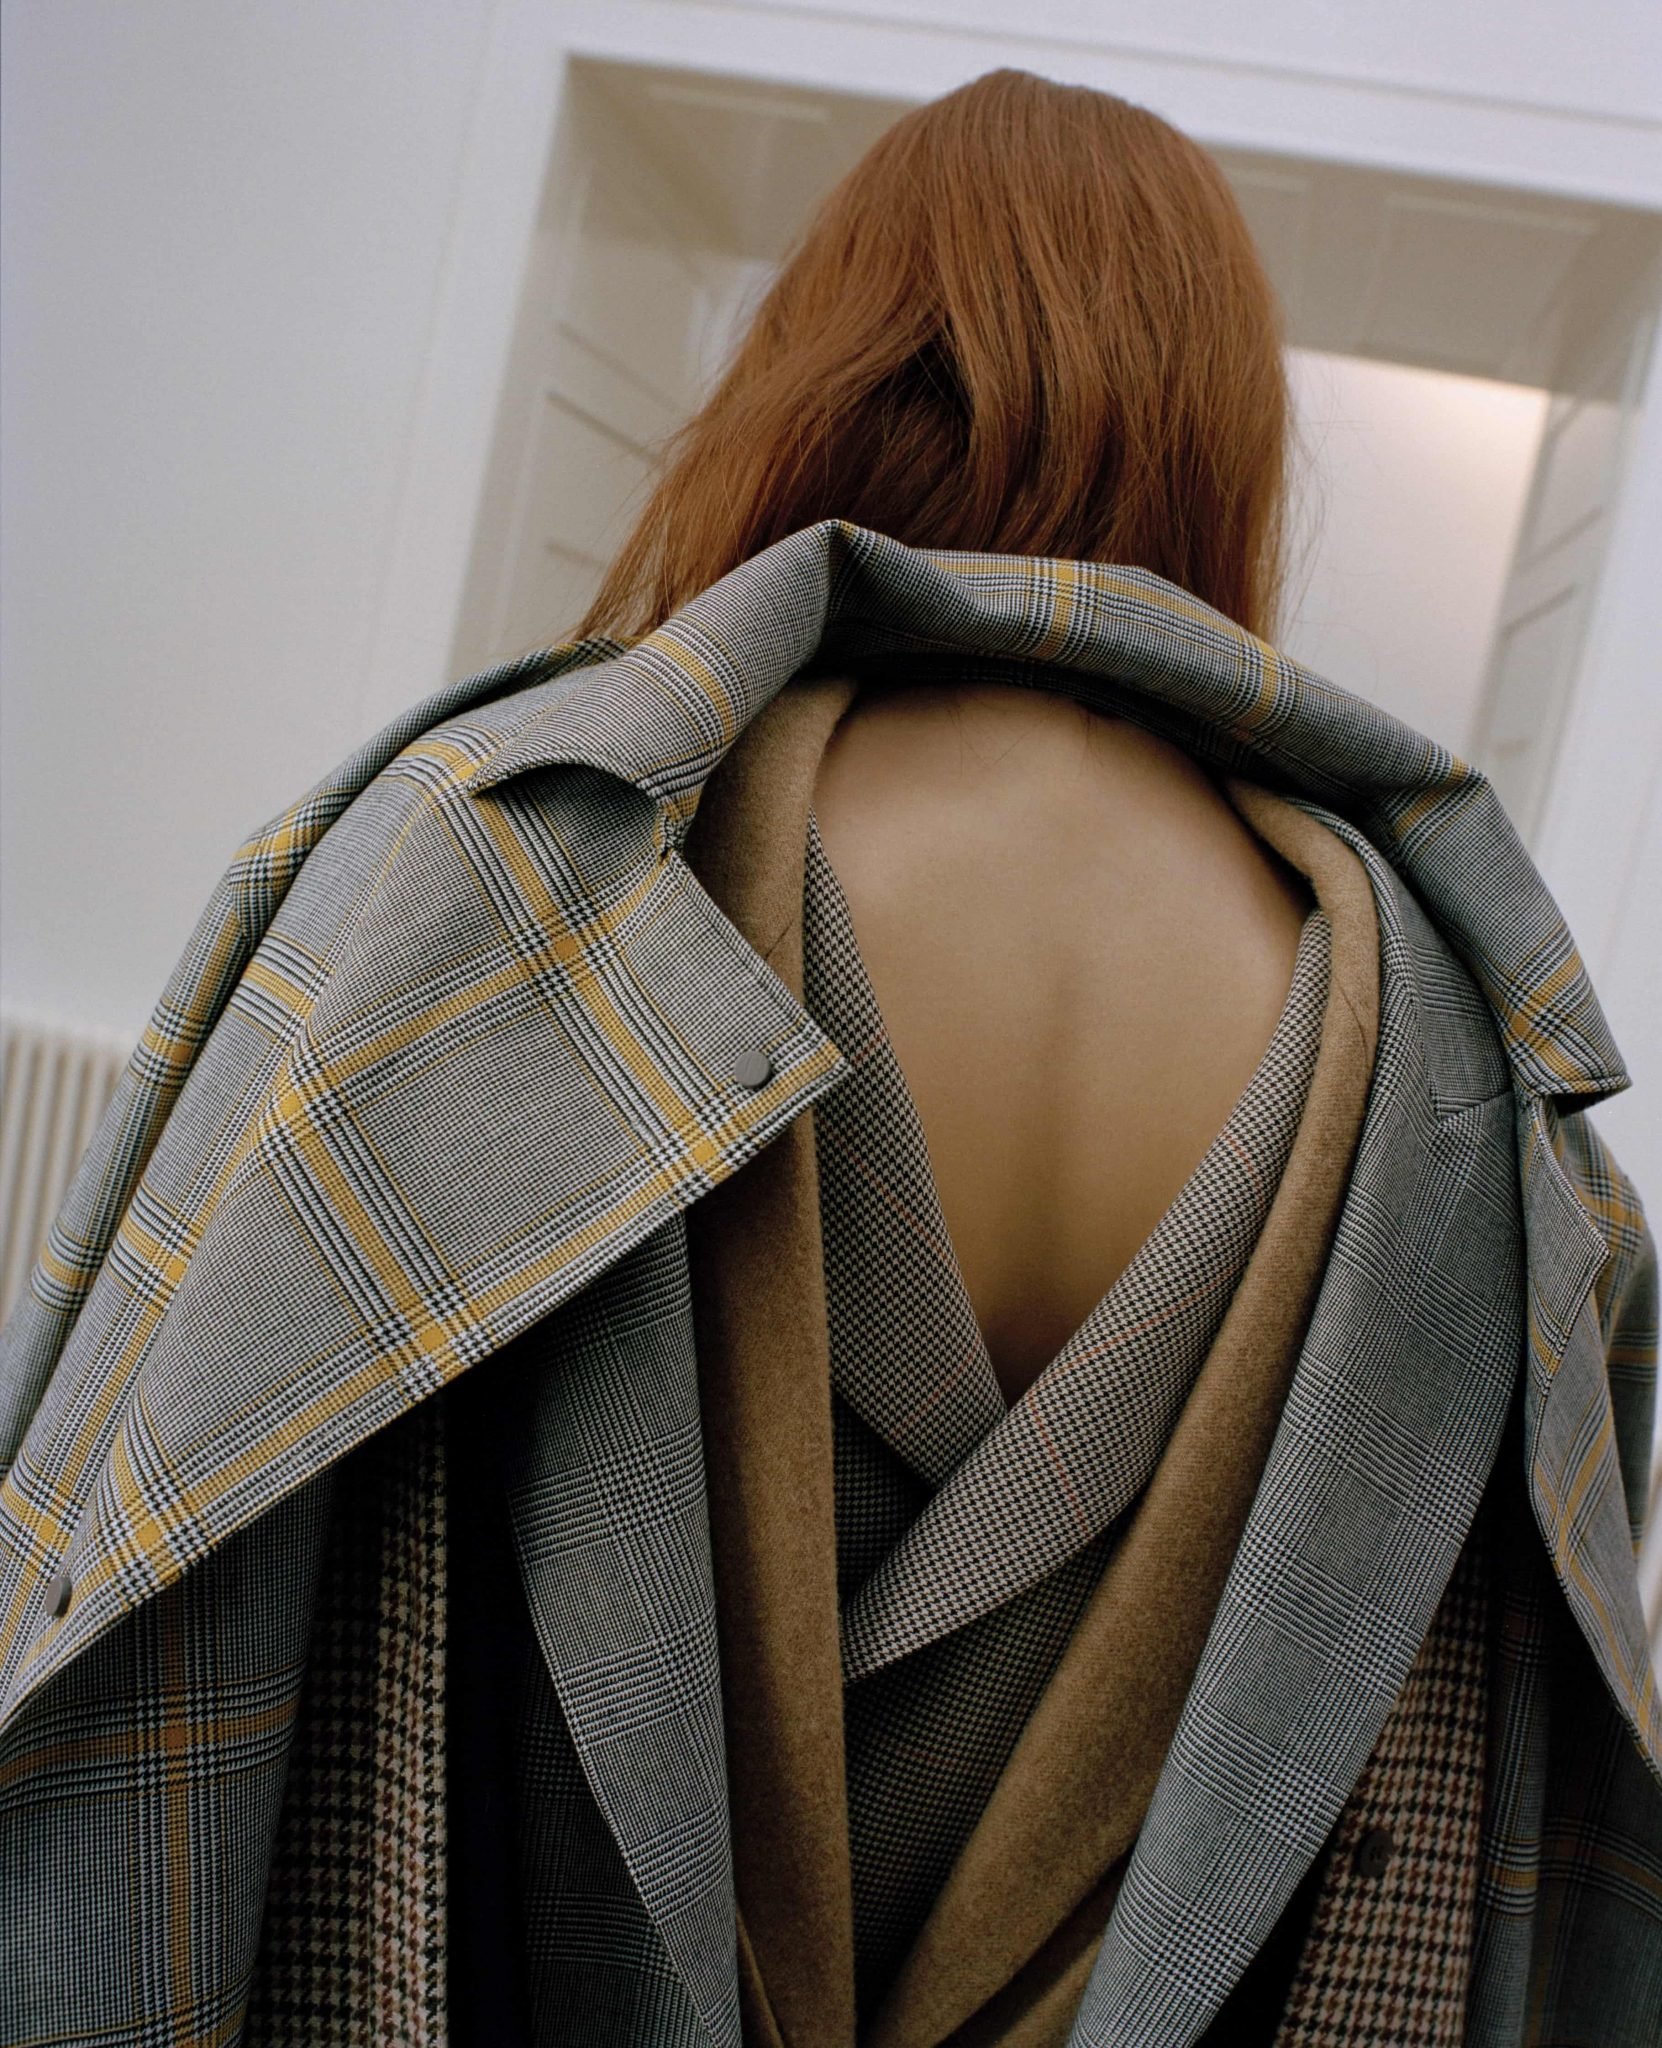 For Fashion Photographer Jin Jia Ji, Beauty Lies In The Textures And ...